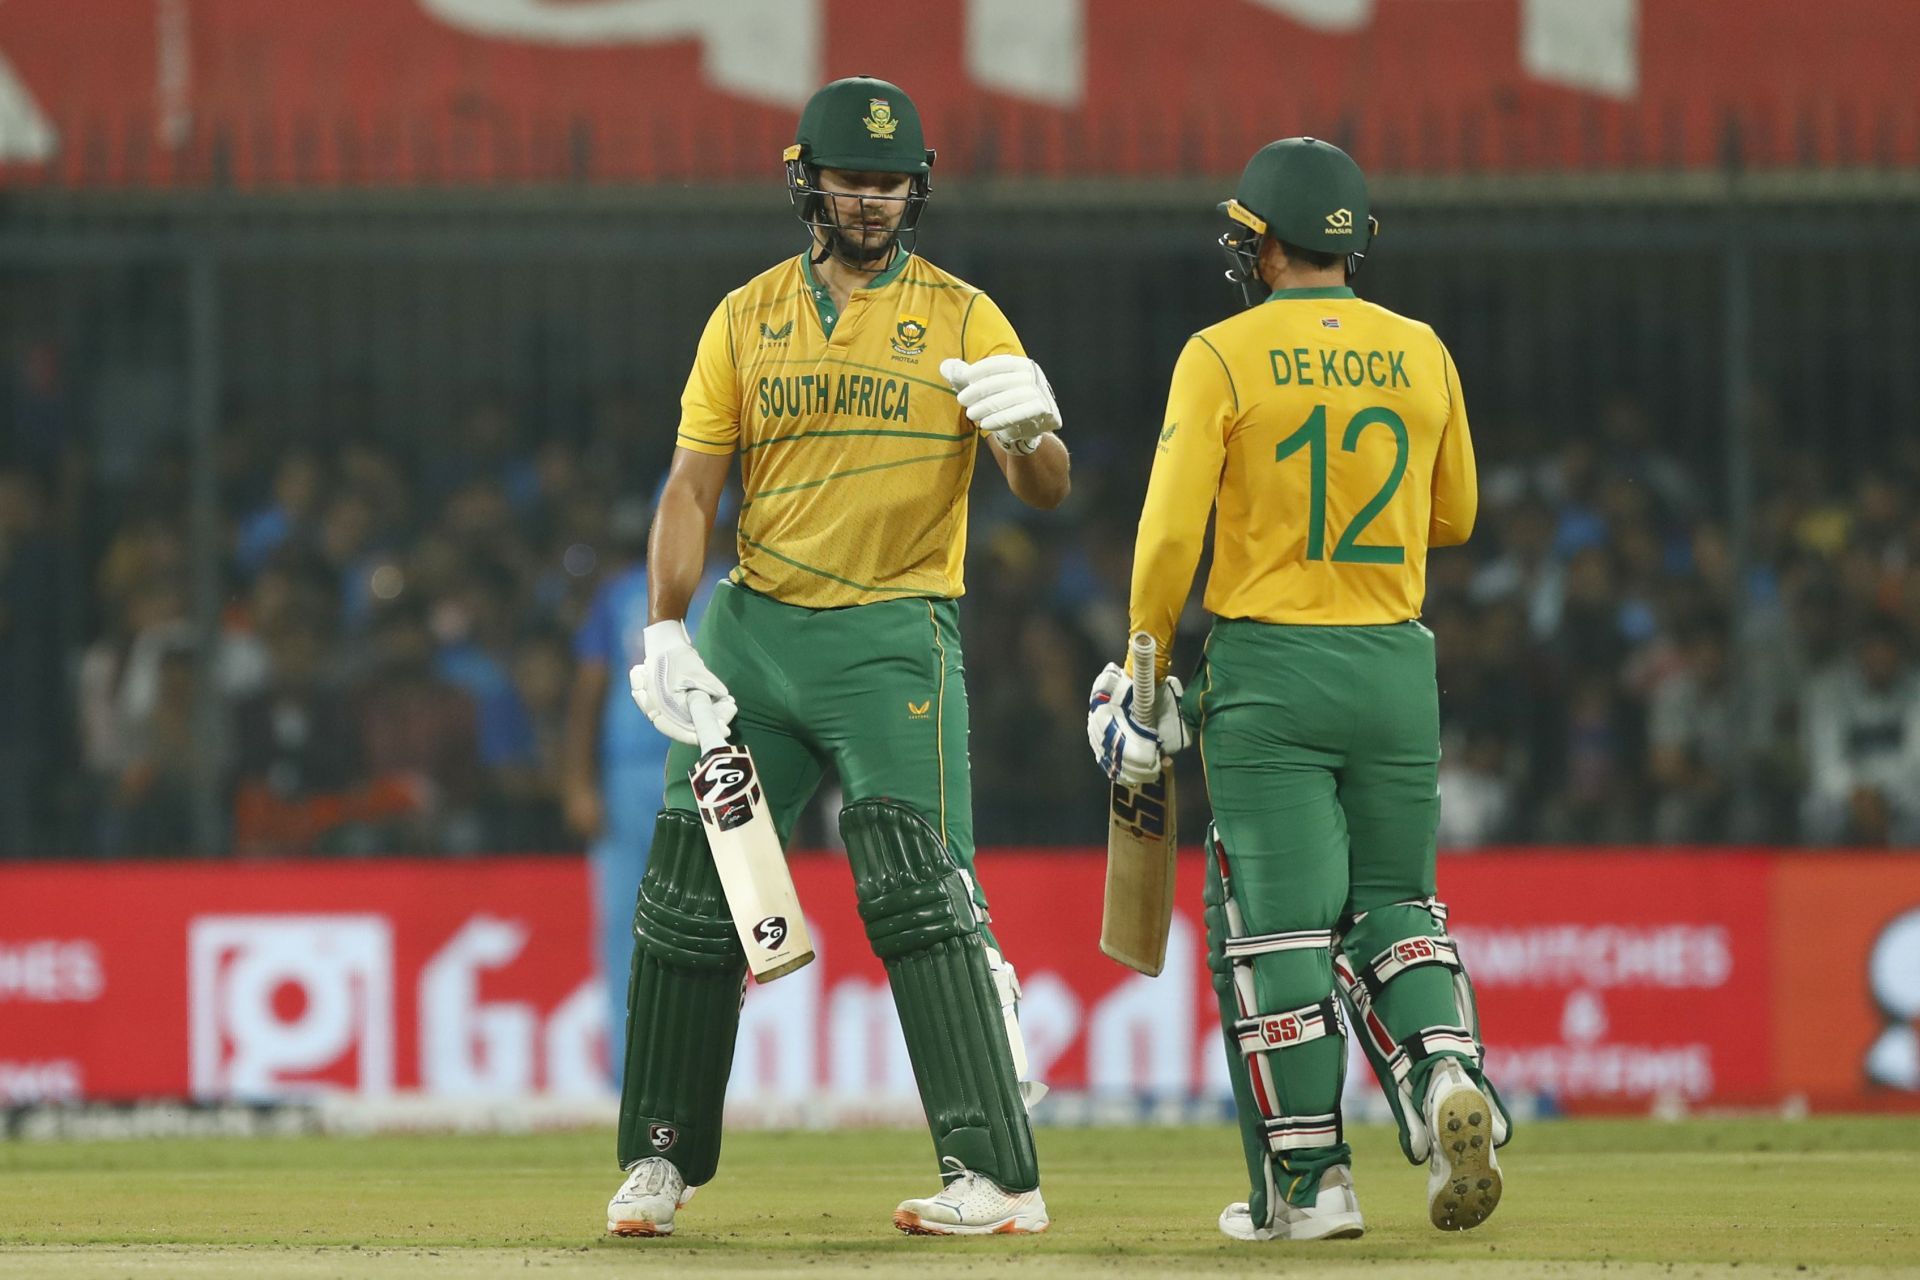 Rilee Rossouw (left) and Quinton de Kock are in sensational batting form. Pic: Getty Images